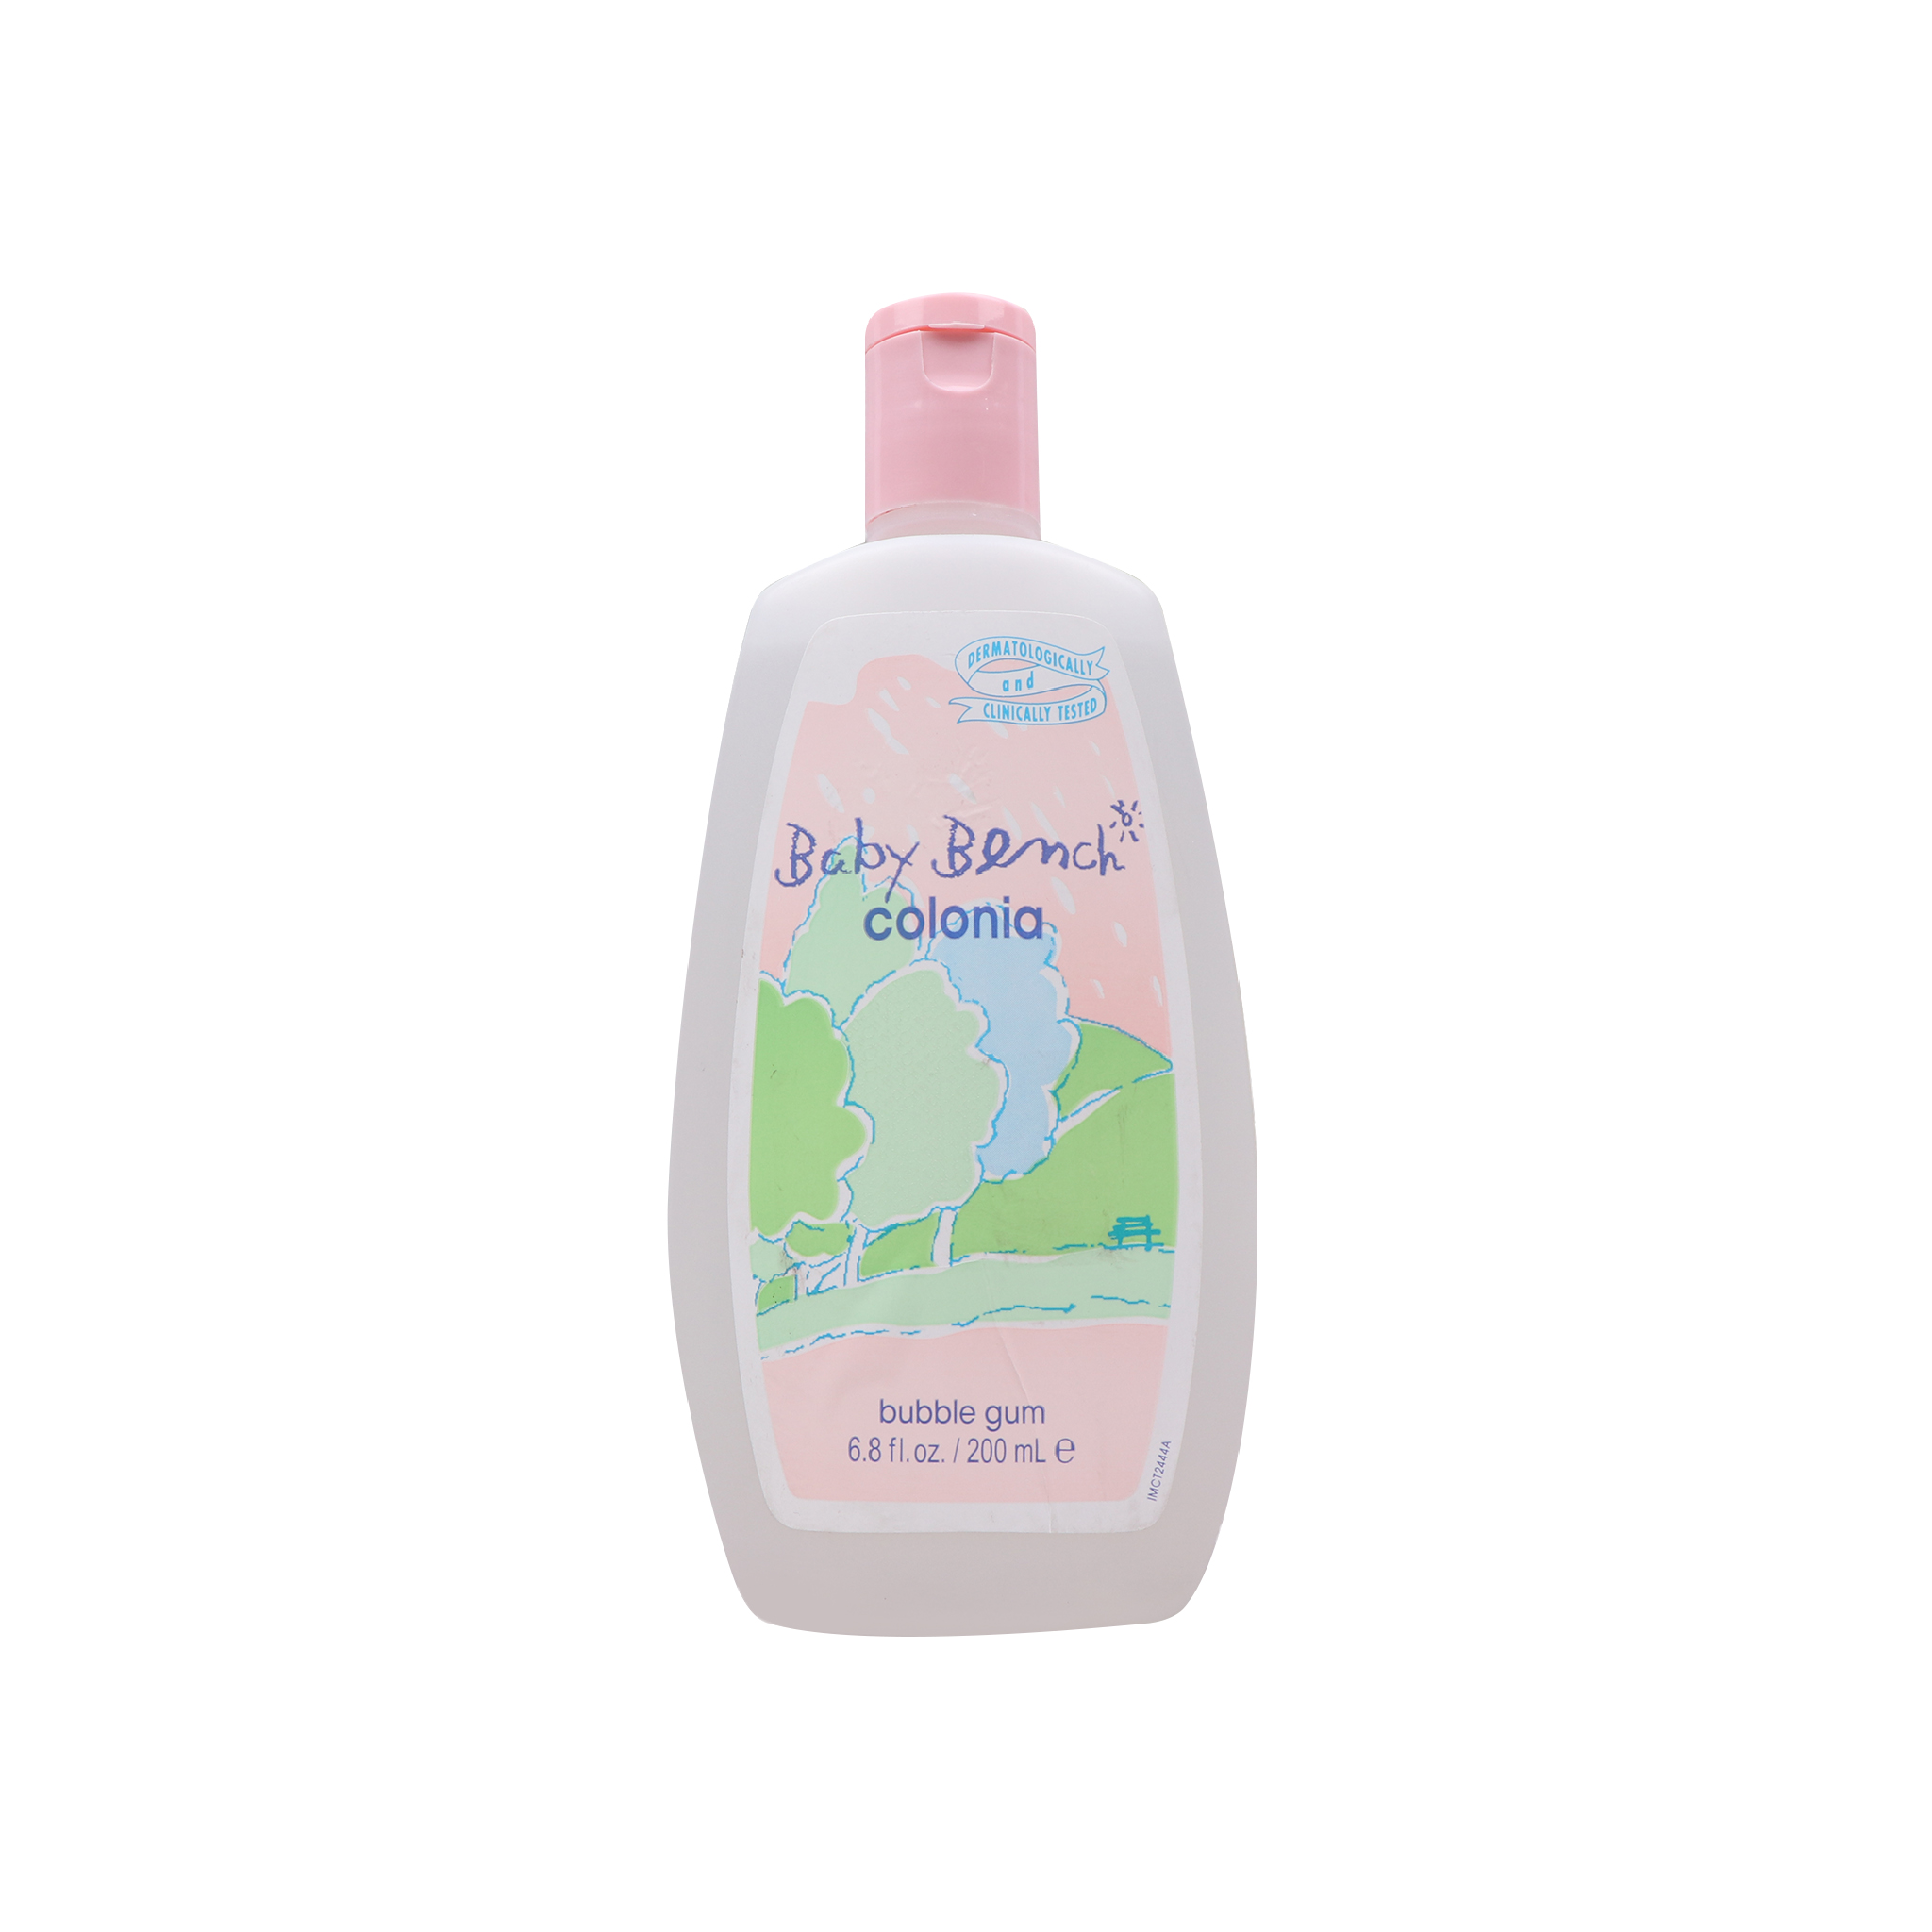 Baby Bench Colonia Cologne Bubble Gum 200ml - 1Sell